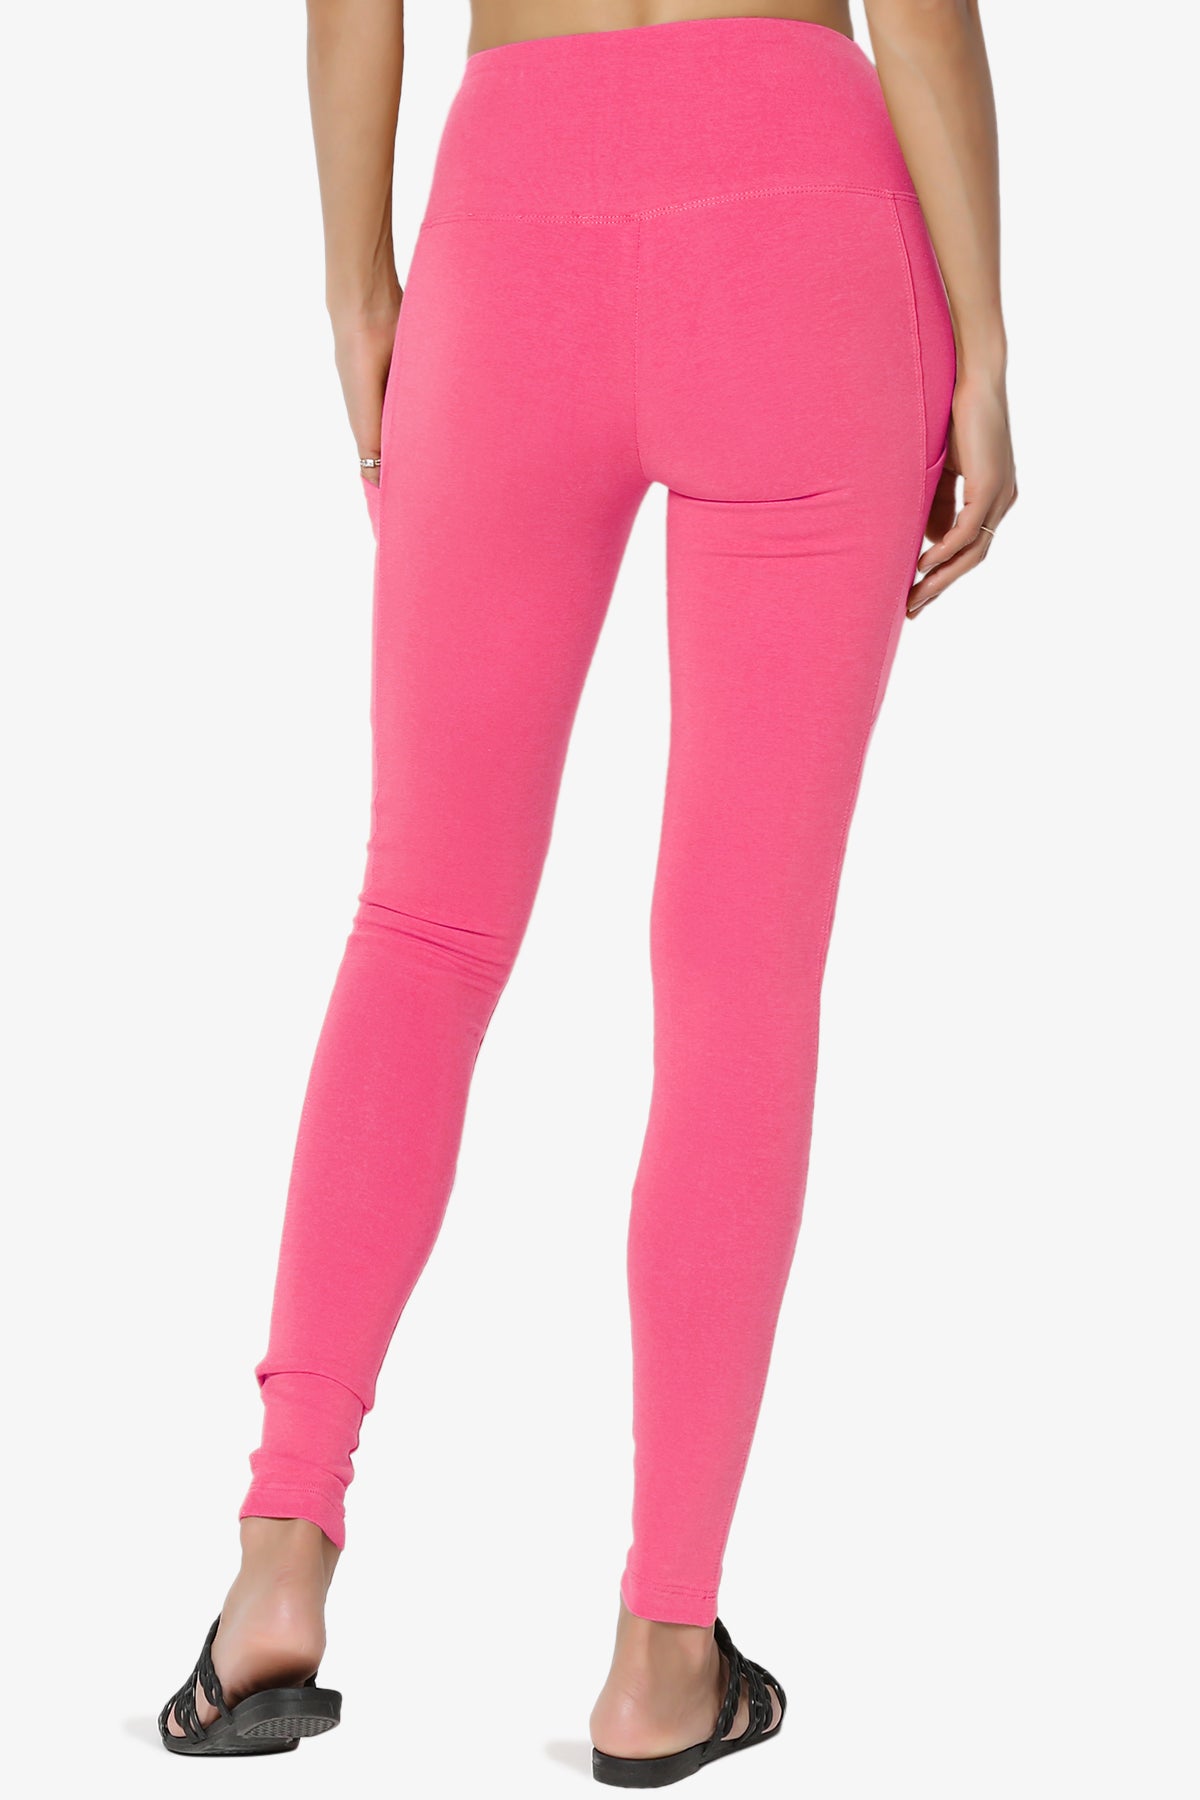 Ansley Luxe Cotton Leggings with Pockets FUCHSIA_2